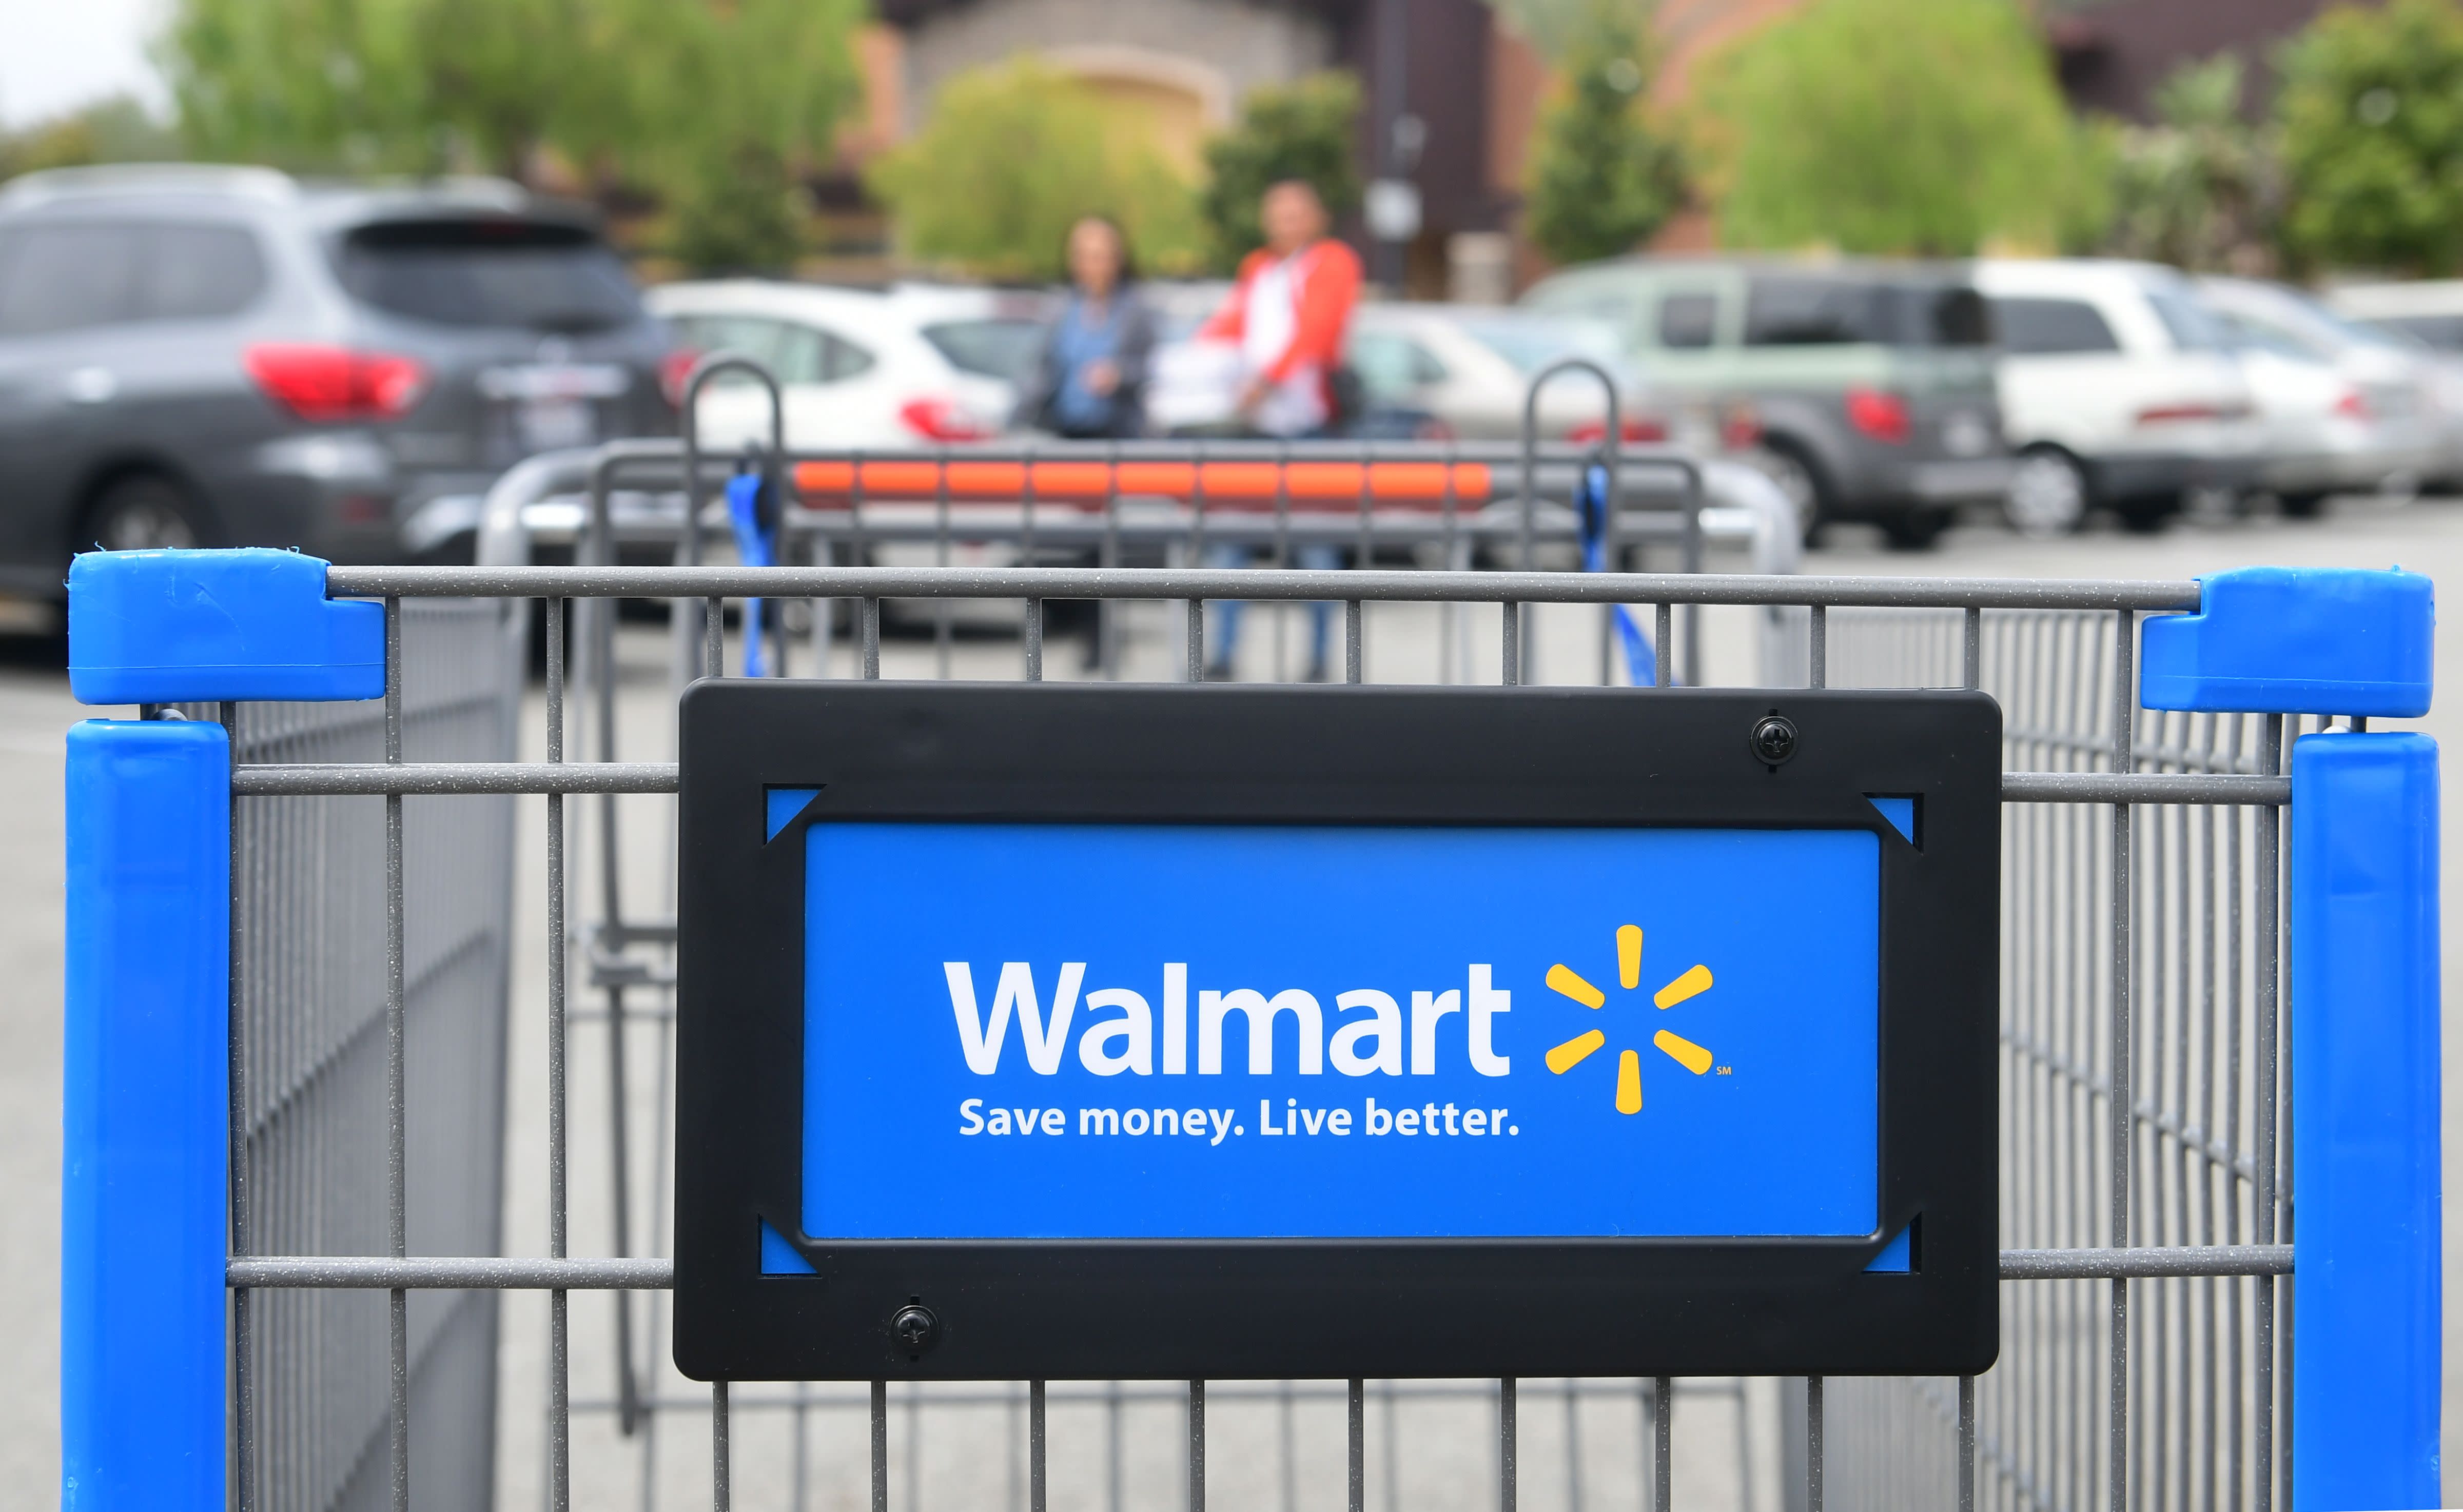 Walmart CFO Discusses Top Financial Priorities at Annual Shareholders